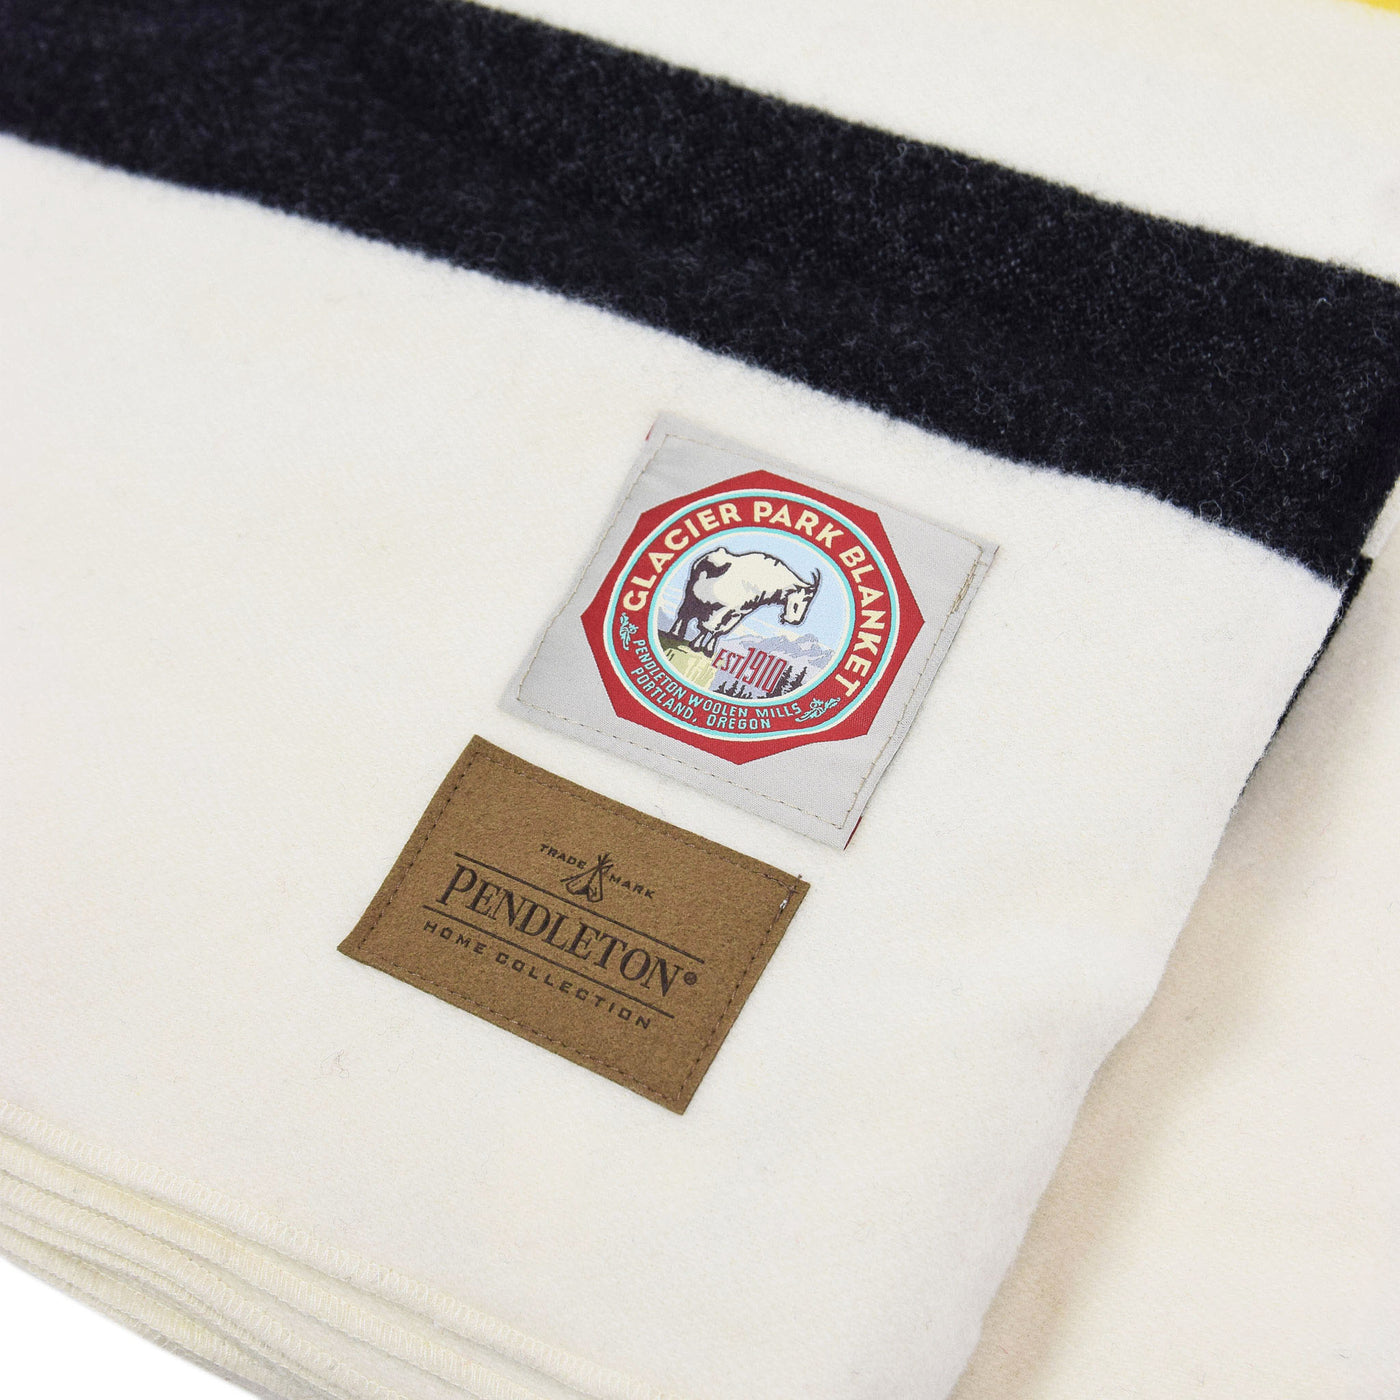 Pendleton National Park Striped Wool Throw Made in the USA label detail